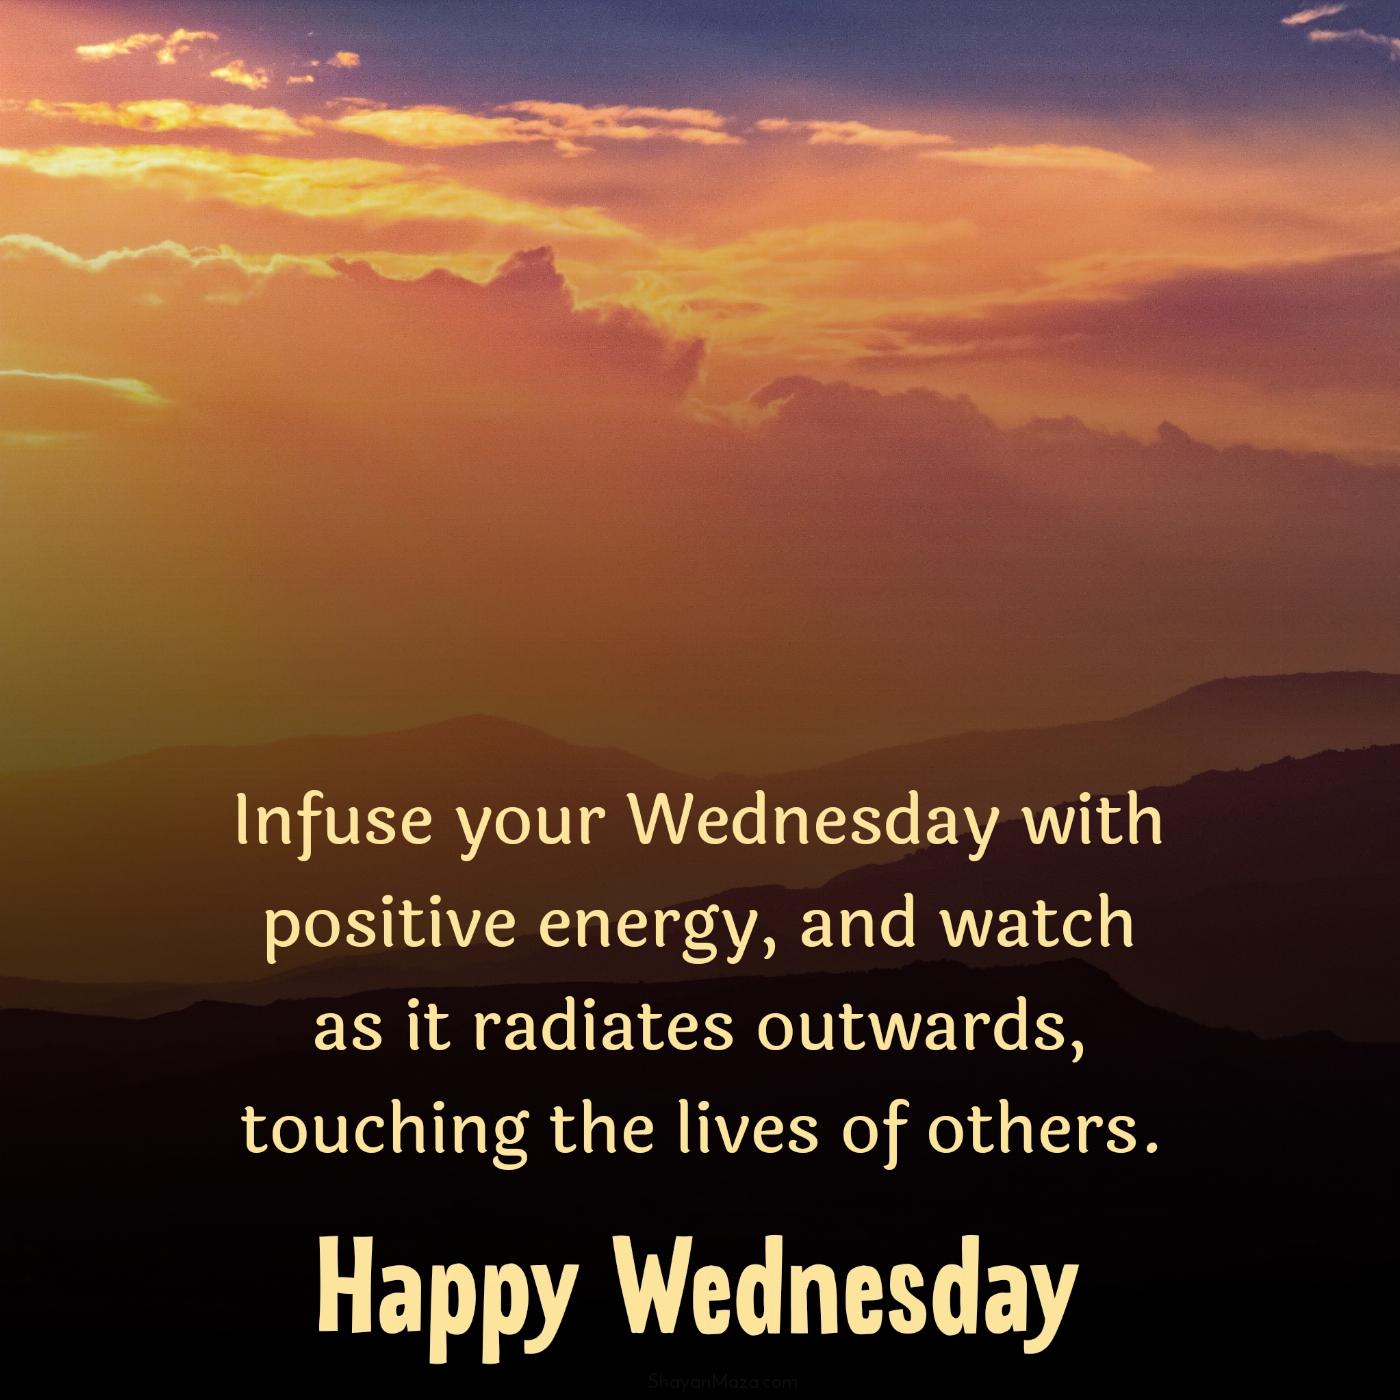 Infuse your Wednesday with positive energy